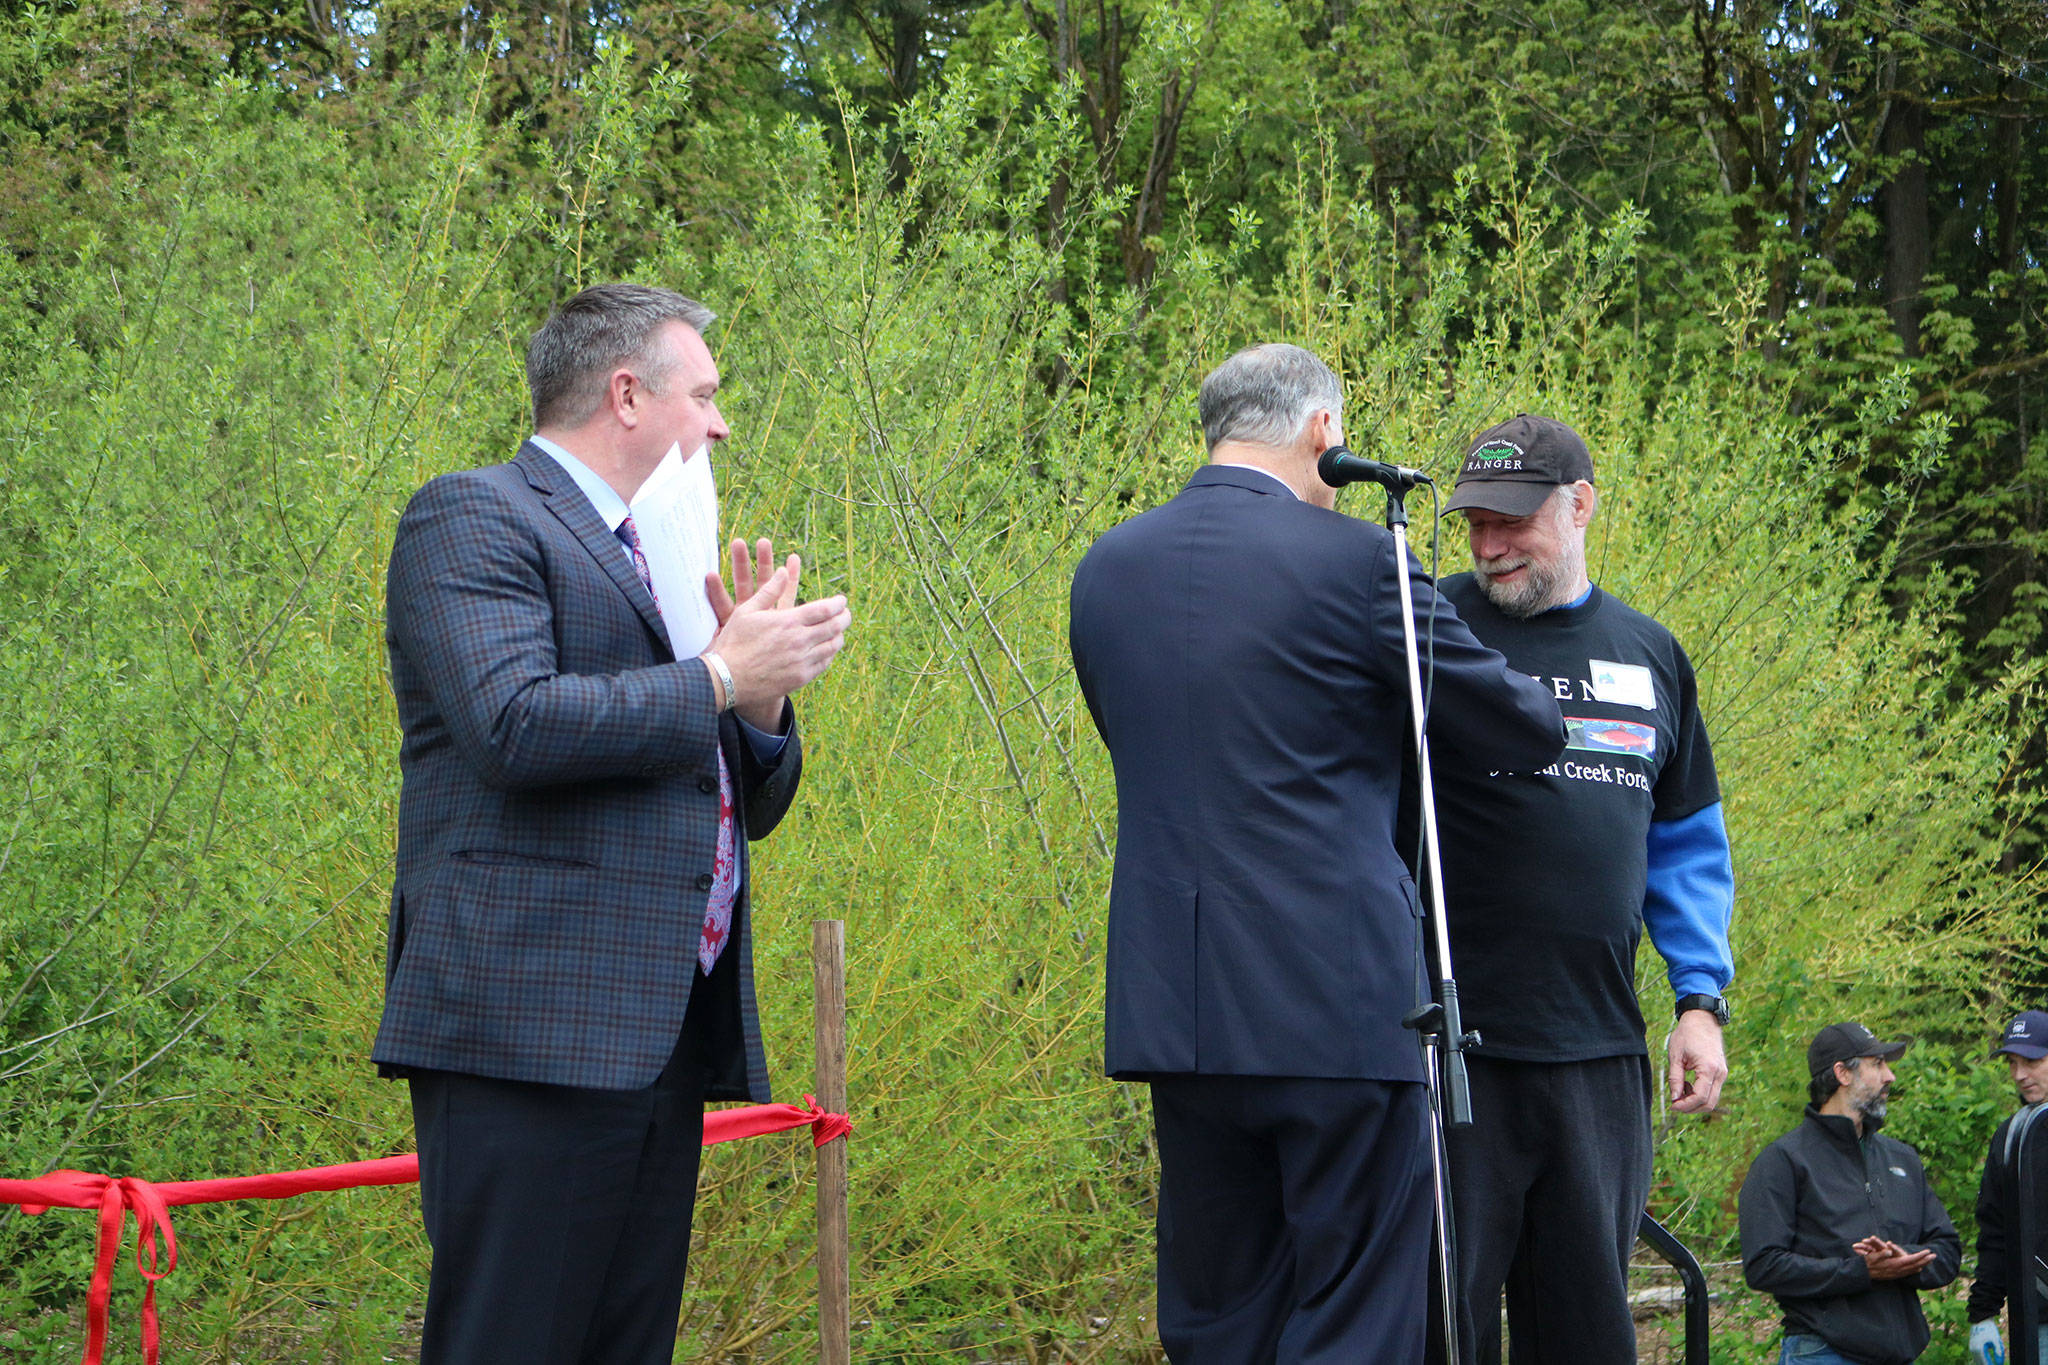 As part of being named Washingtonian of the Day, Gov. Jay Inslee (center) gives David Bain (right) the Washington State pin from his lapel. Bothell Mayor Andy Rheaume (left) applauds Bain receiving the honor on behalf of all of those who contributed to the city’s acquisition of North Creek Forest. CATHERINE KRUMMEY / Bothell Reporter